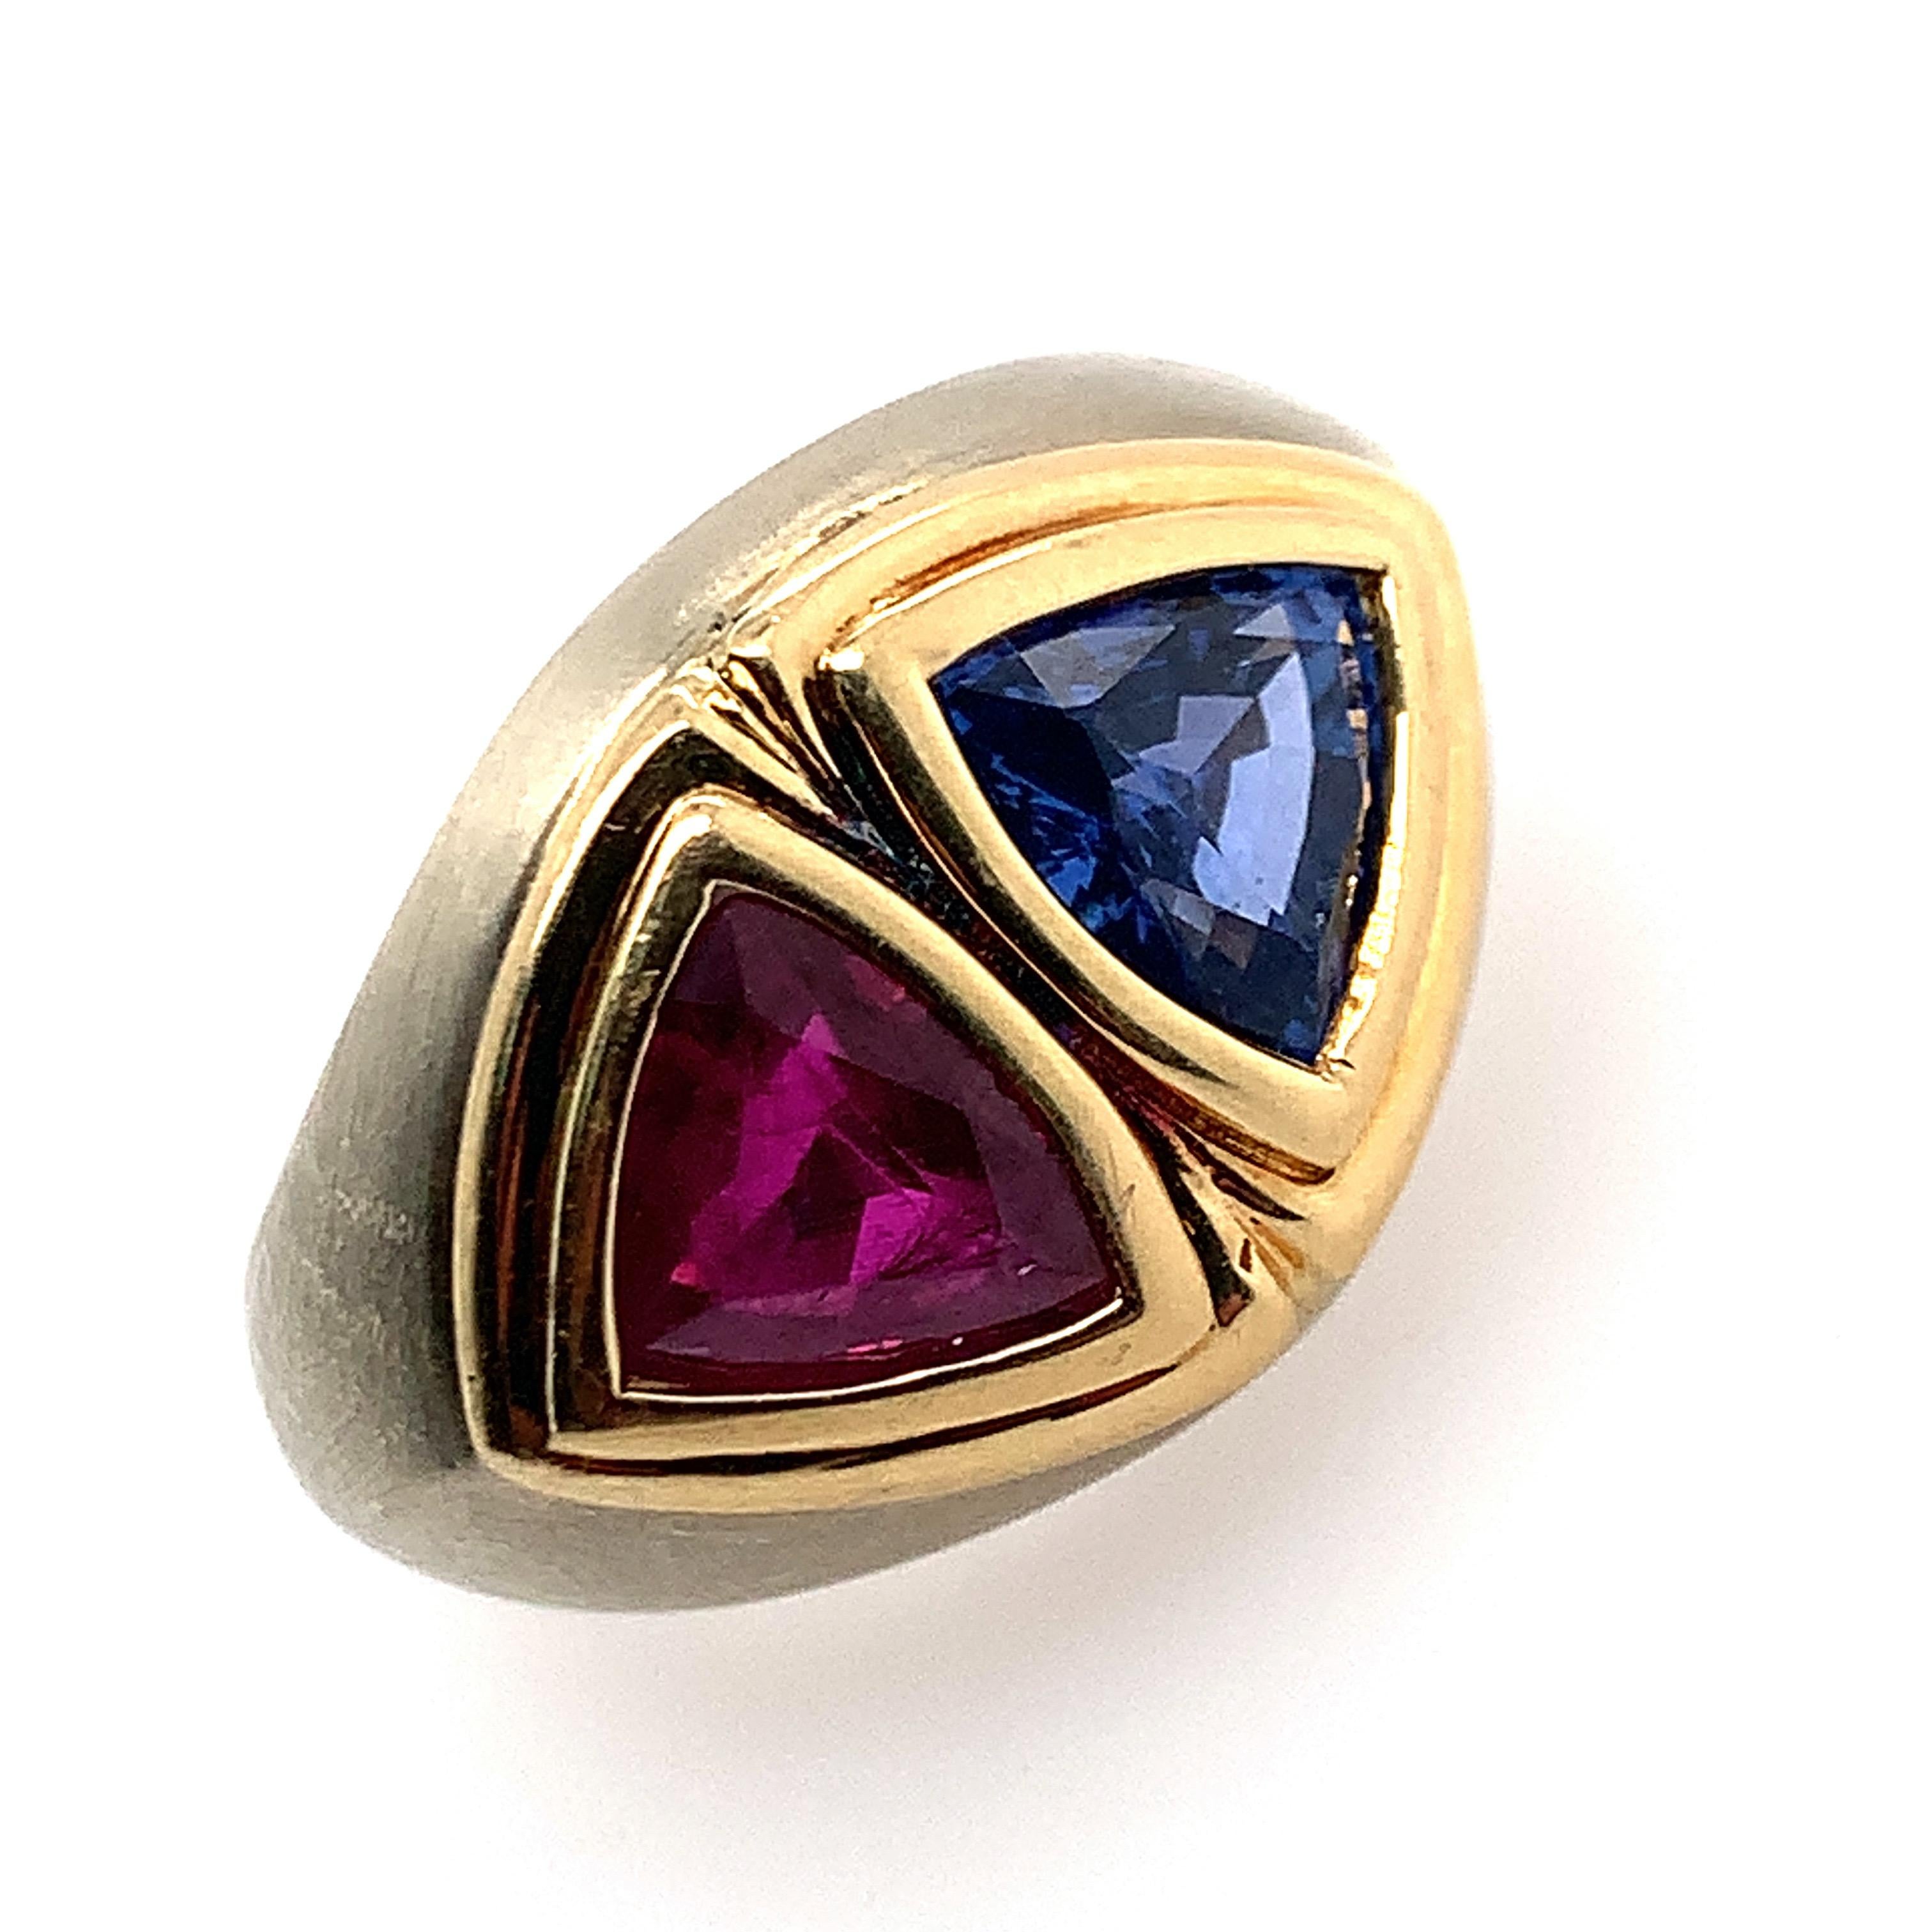 The broad tapering band of bezel-set Toi et Moi design, set with a trilliant-cut sapphire weighing approximately 1.45 carats and a ruby weighing approximately 1.40 carats, in brushed textured and polished 18k white and yellow gold, size 5